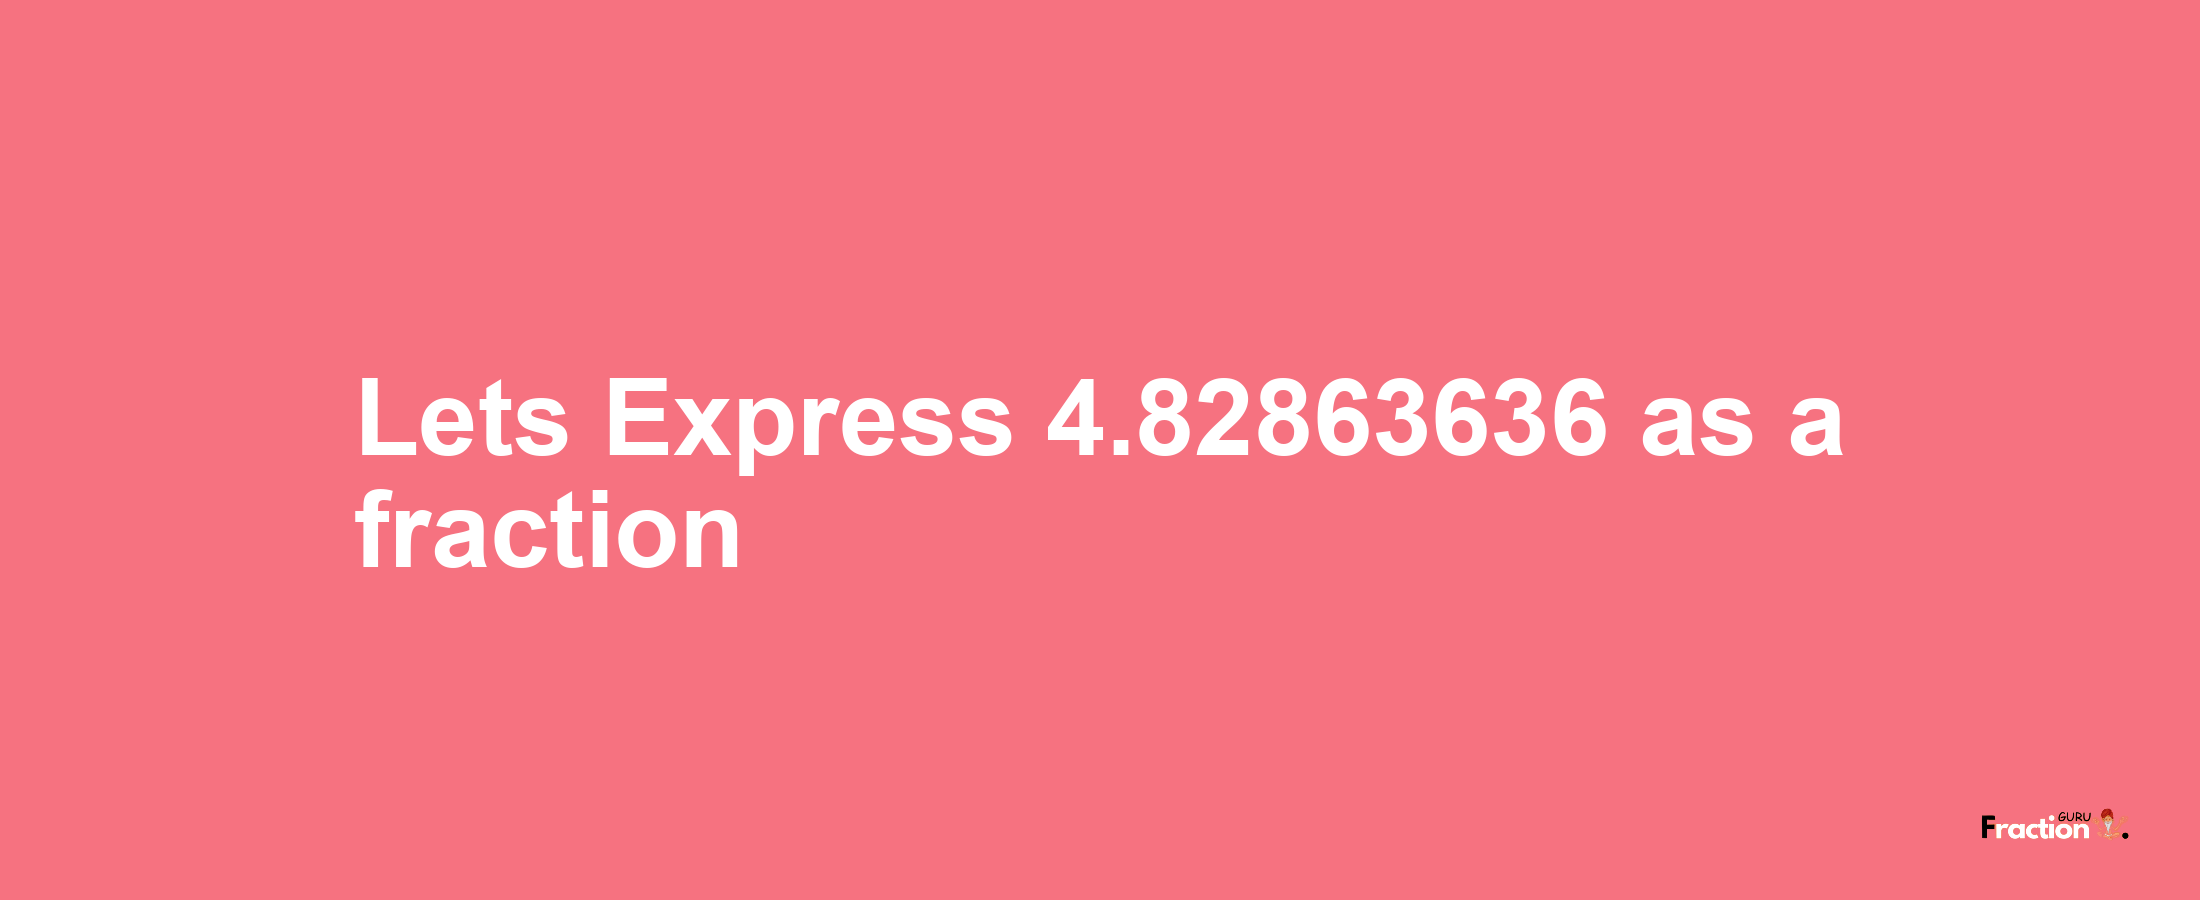 Lets Express 4.82863636 as afraction